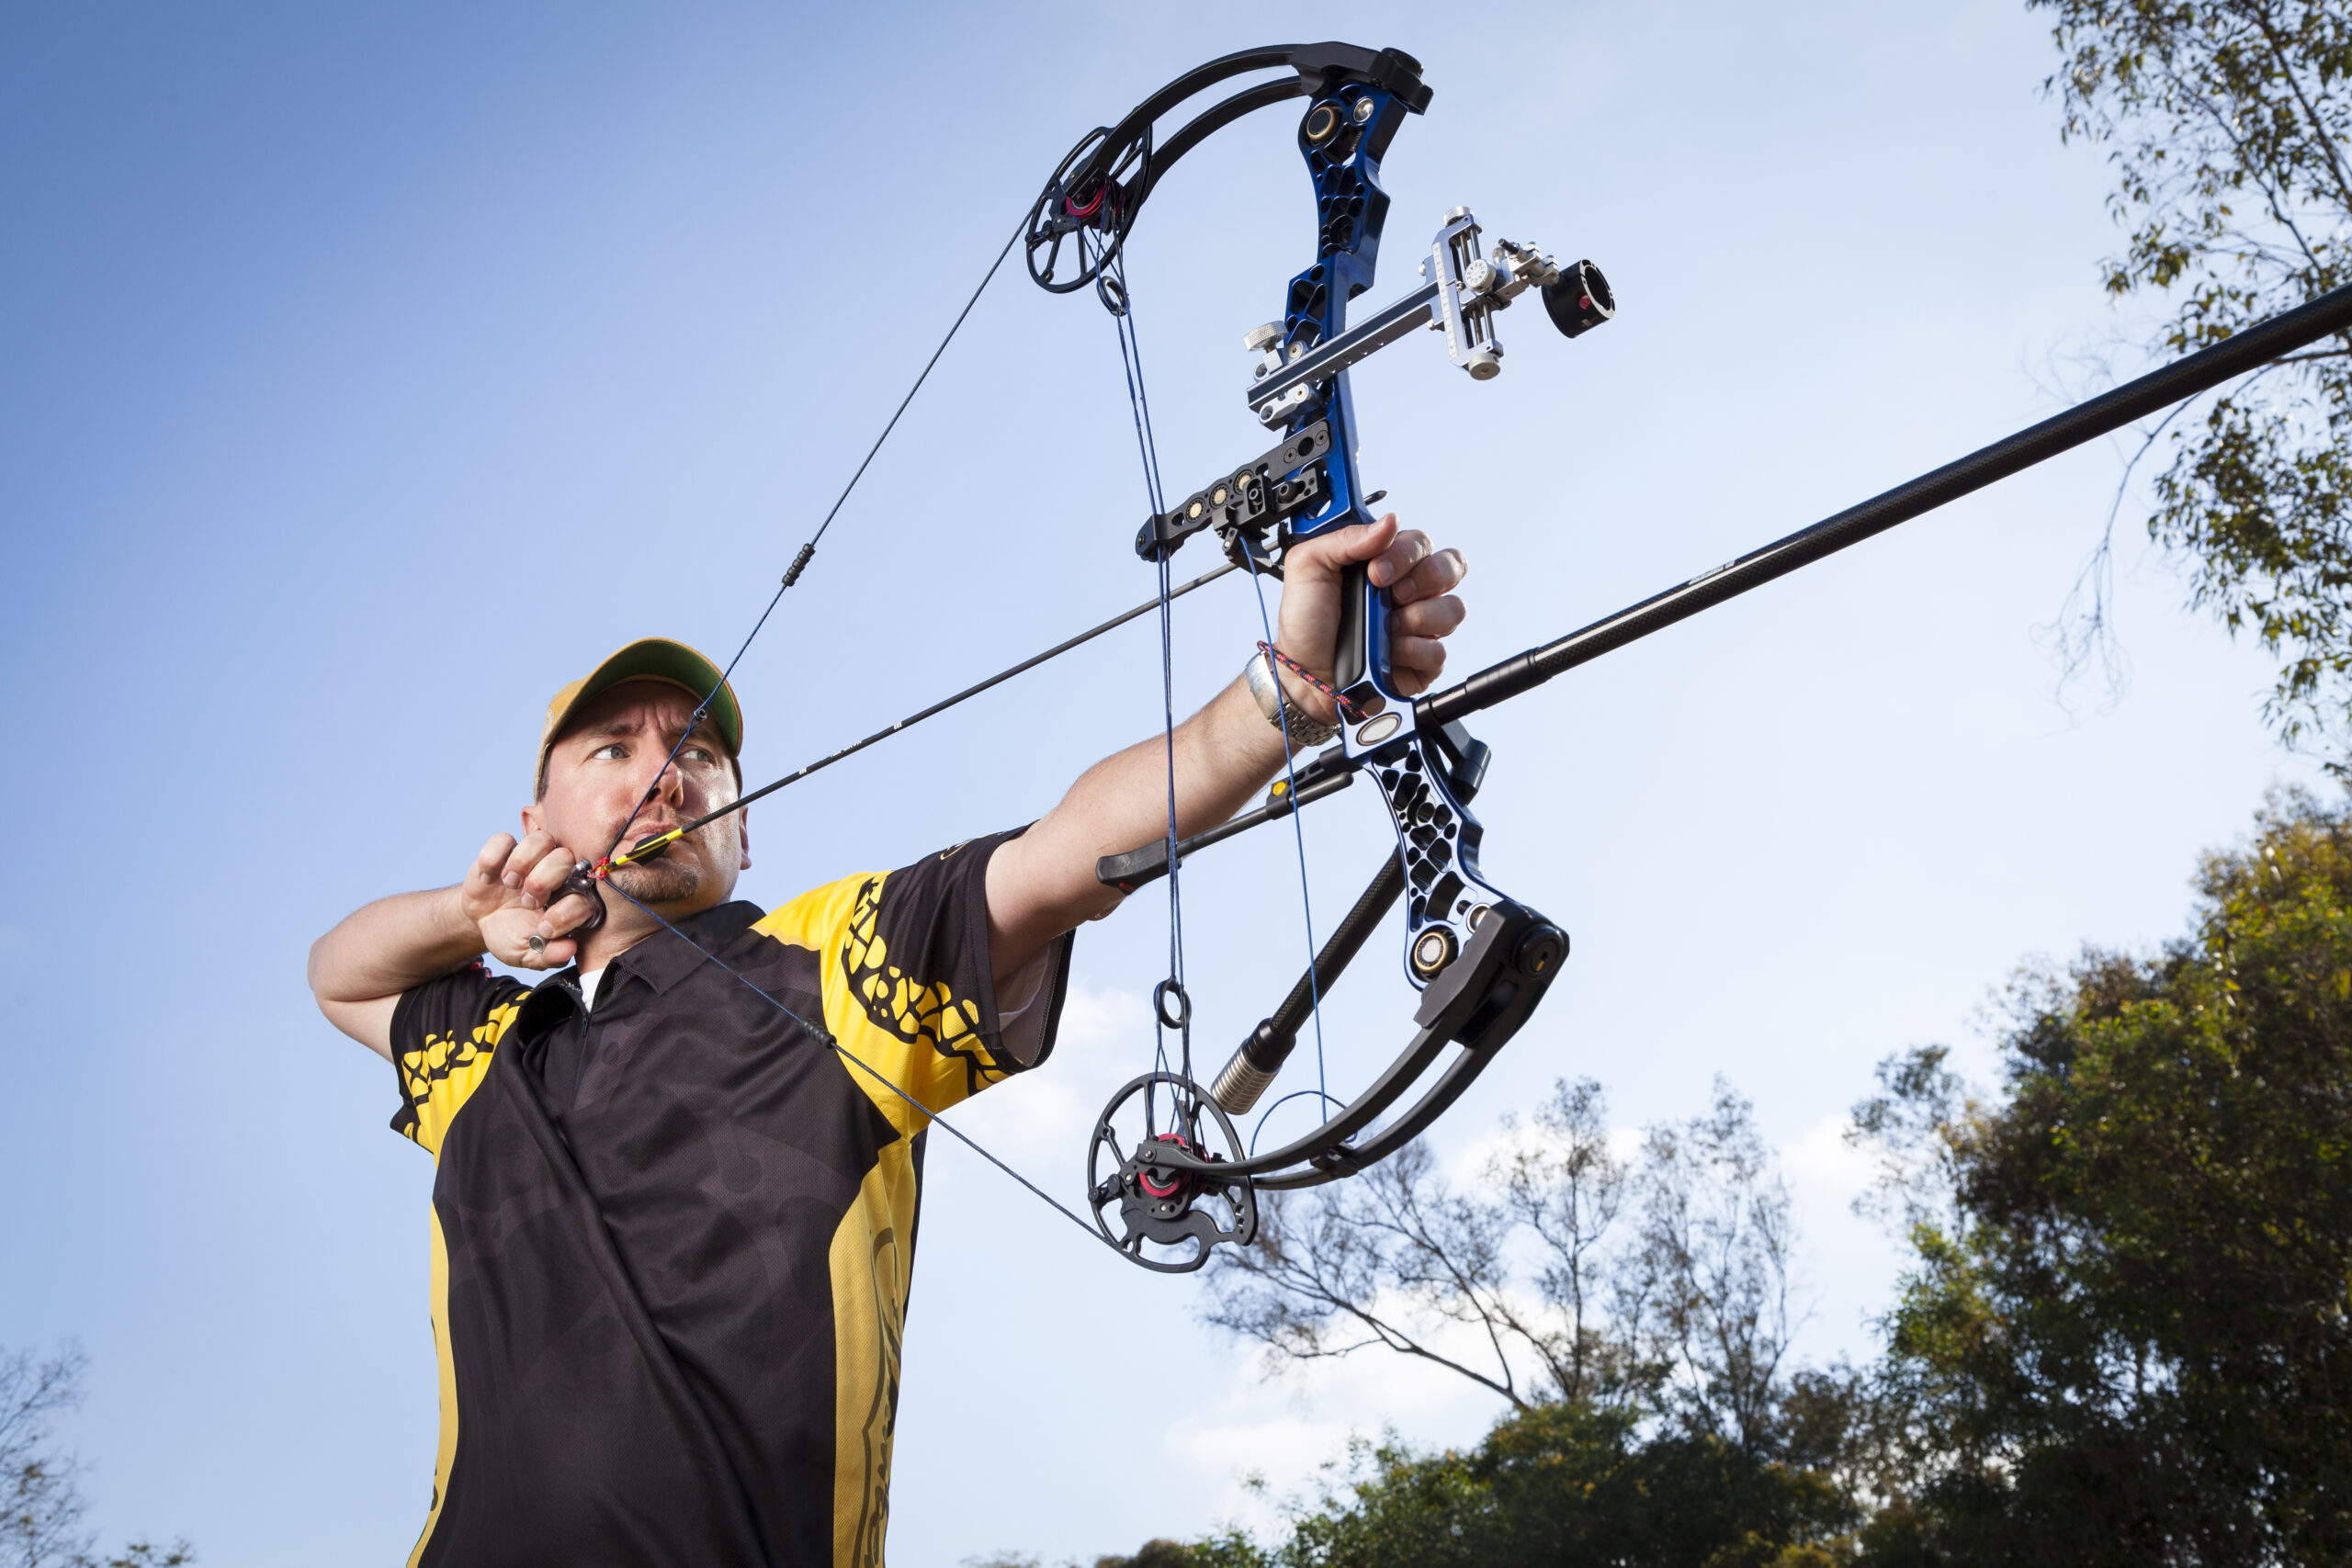 <h1 class="tribe-events-single-event-title">Open NASP Archery Sessions @ Cameron Regional YMCA</h1>